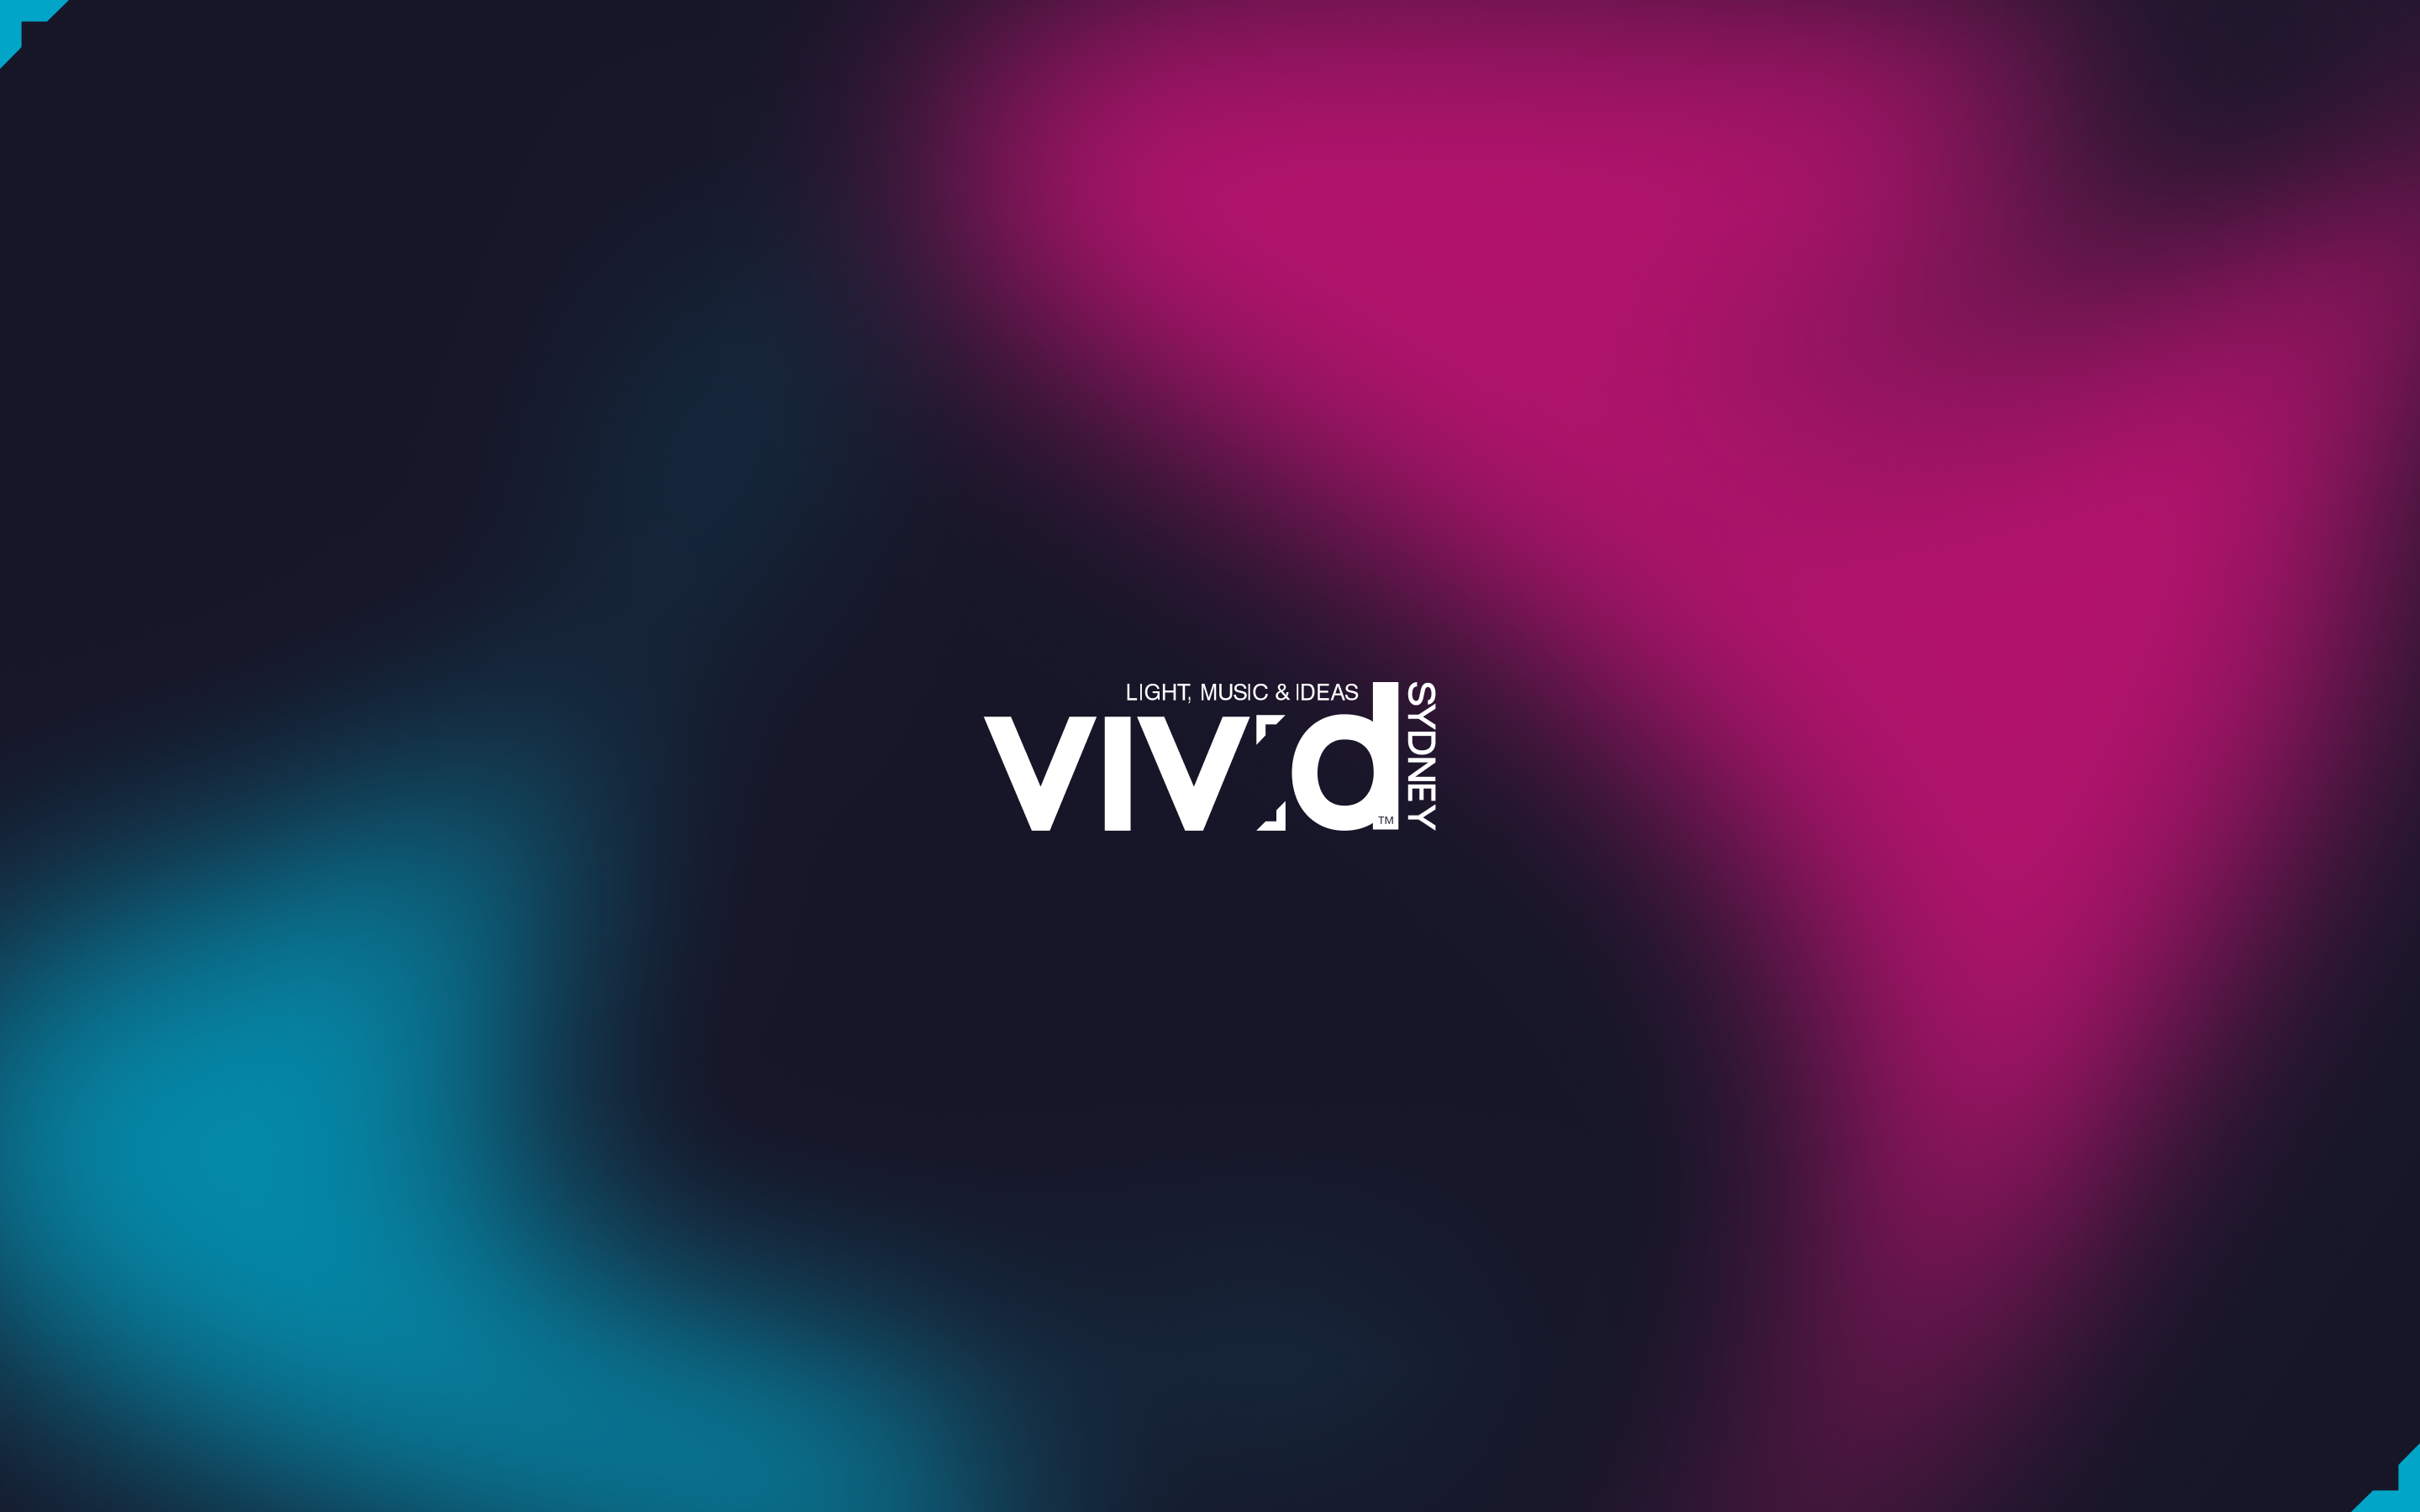 Vivid logo showcasing the new colour palette blurred in the background